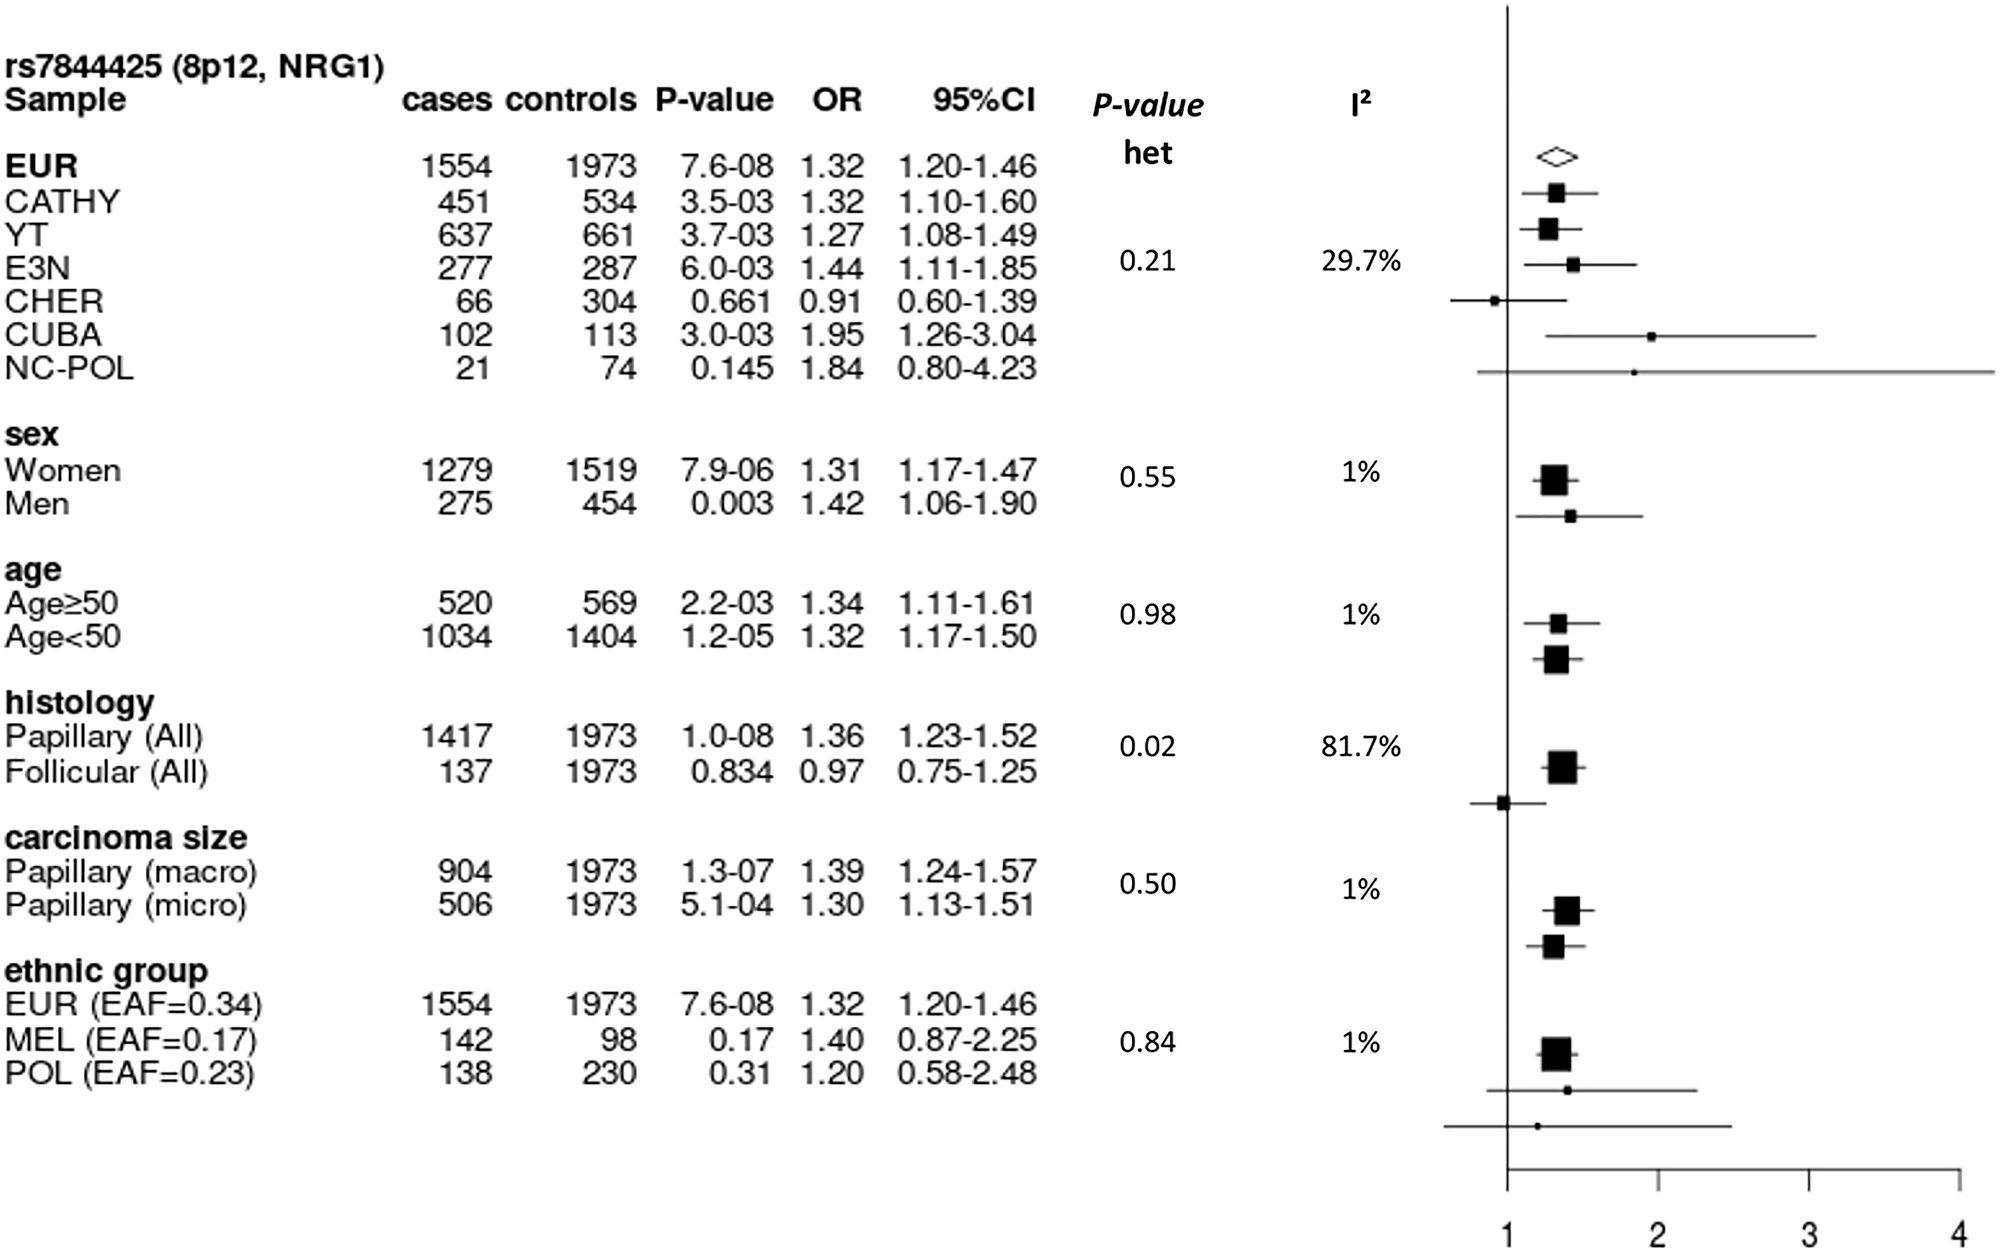 Figure 4: Forest plot of subgroup analyses for rs7844425 stratifying on study, sex, age group, histology and size of carcinoma in Europeans, and stratifying on population group in the entire dataset.